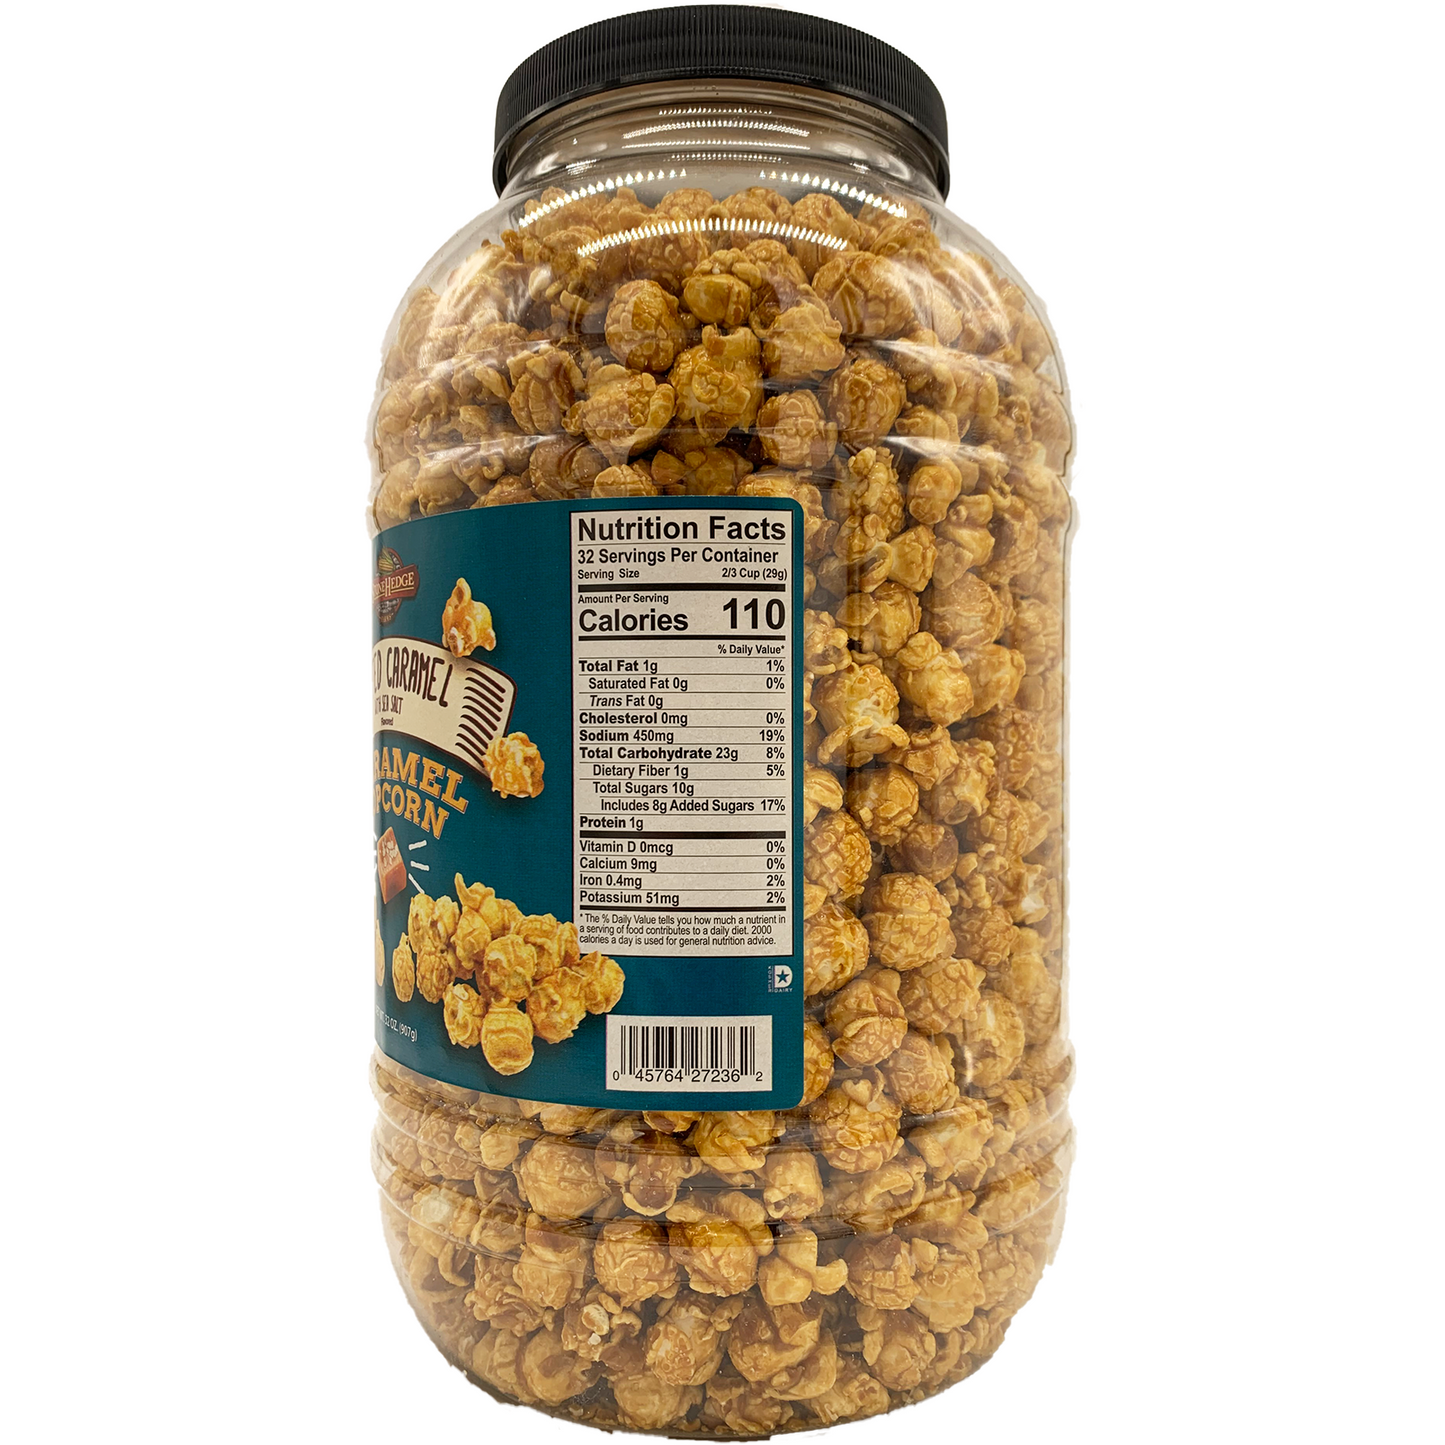 Stonehedge Farms Gourmet Popcorn Barrel Variety Packs - 32 Ounces Each - Two Pack (Caramel + Salted Caramel)